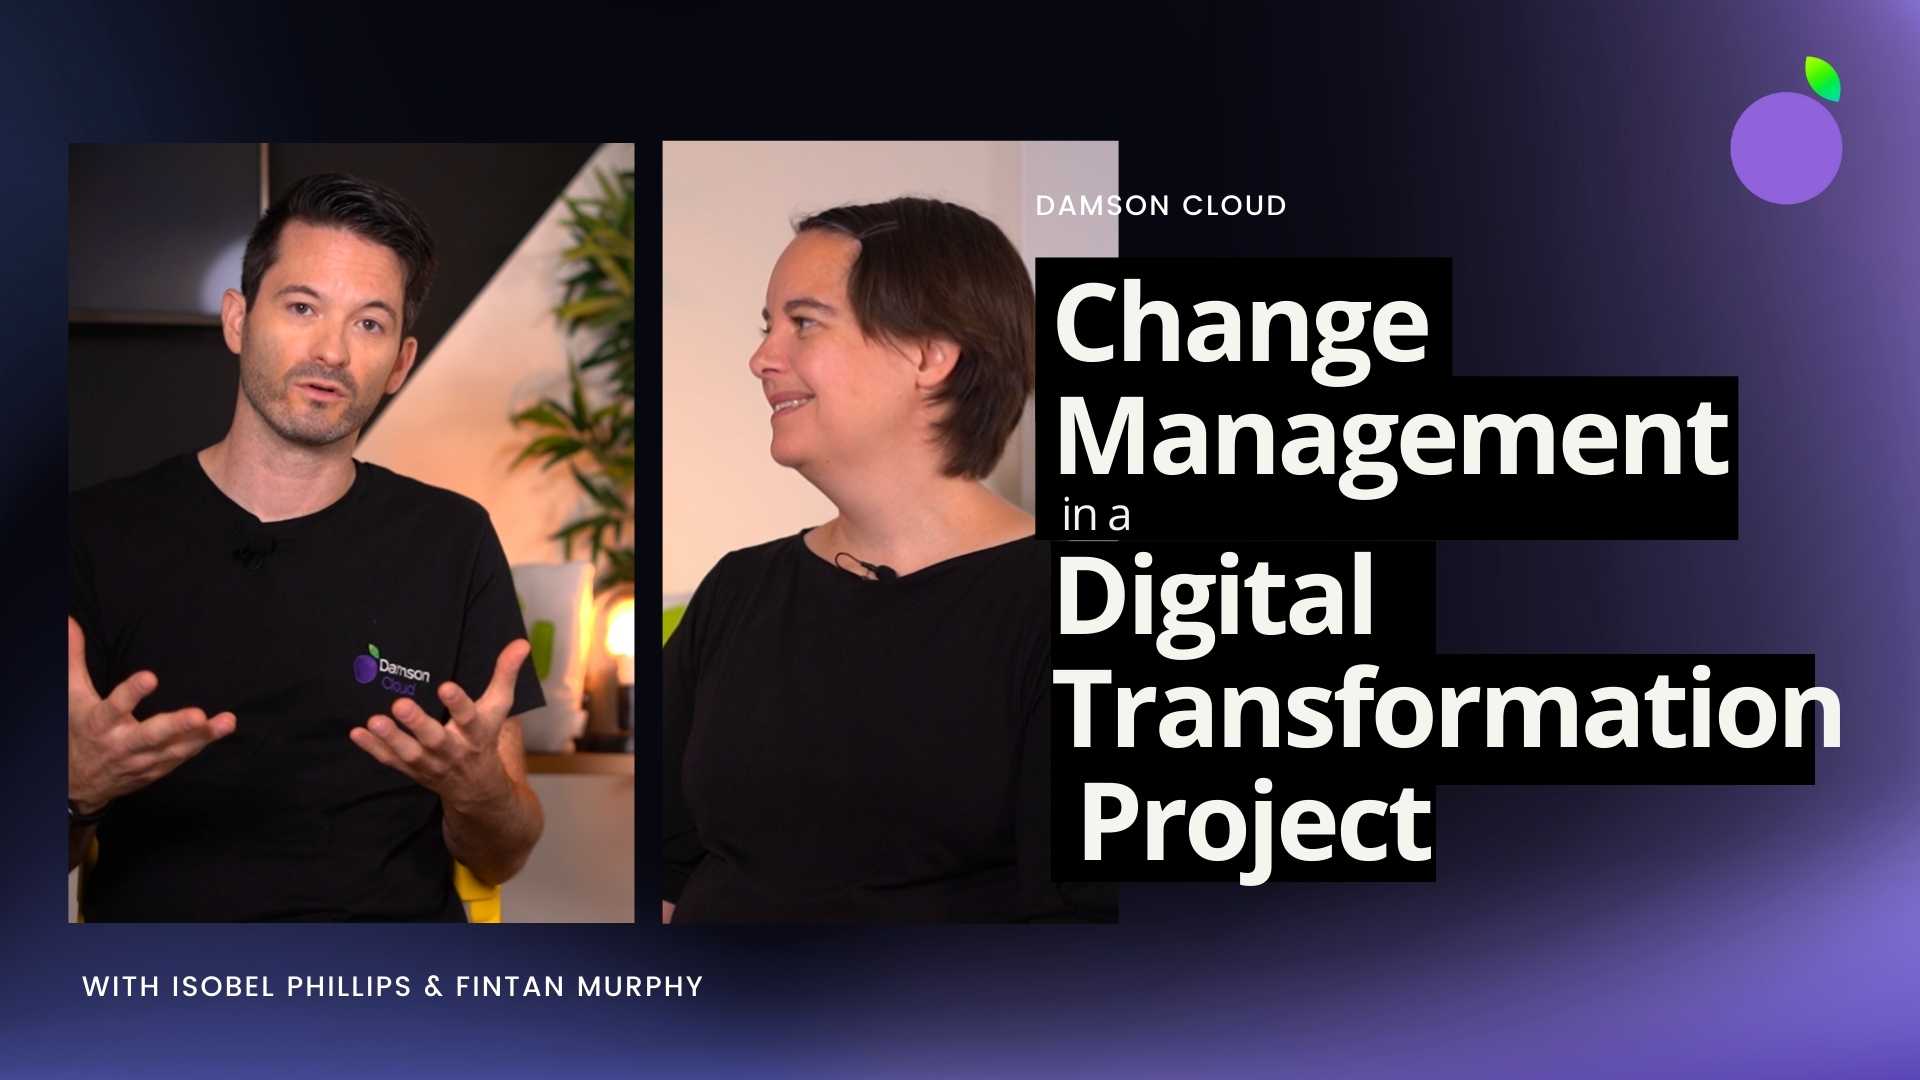 Discussing Change Management in a Digital Transformation Project